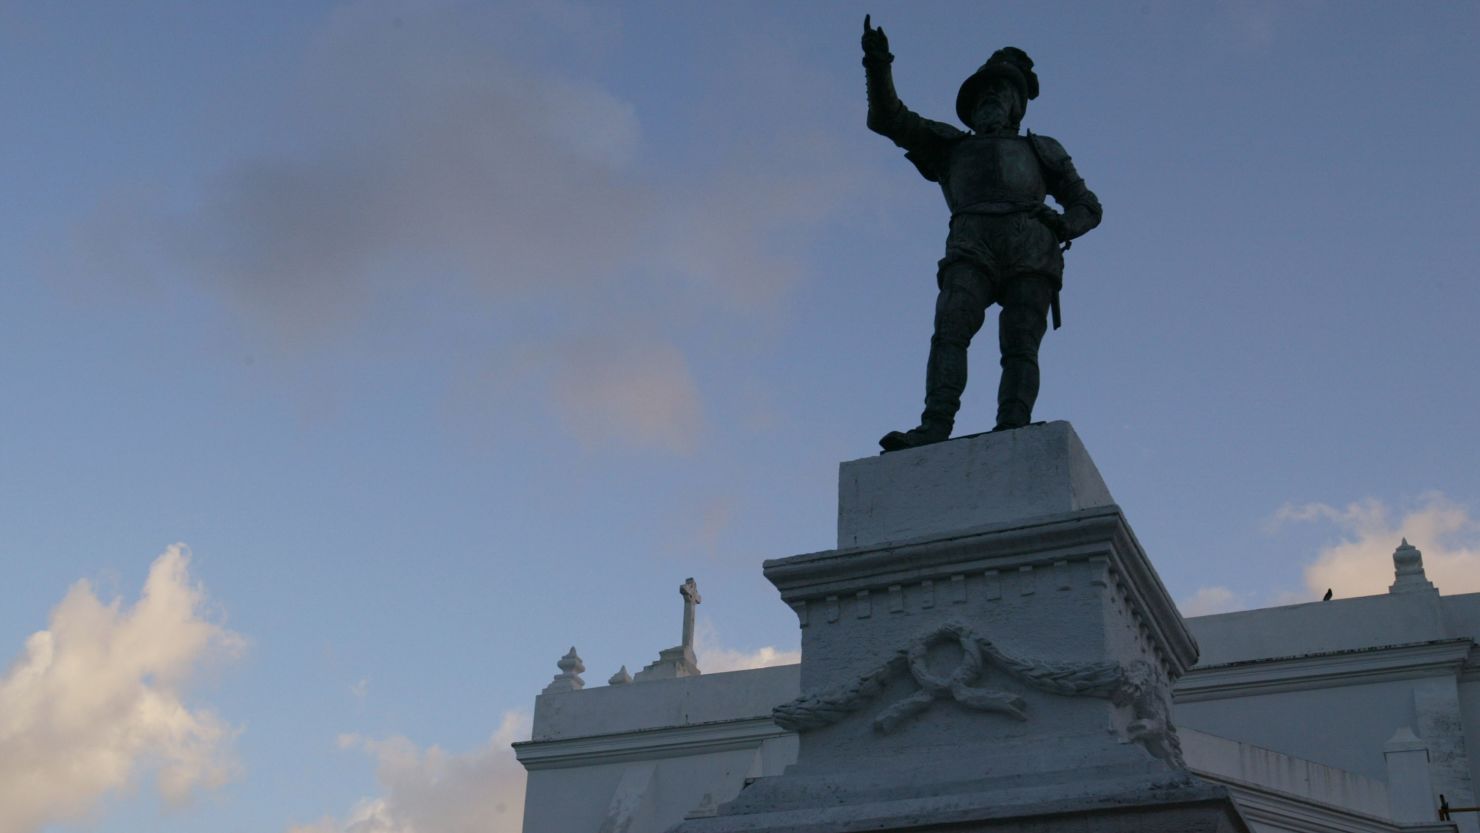  A statue of Juan Ponce de Leon sits in front of the second oldest church in the world in Old San Juan, Puerto Rico.